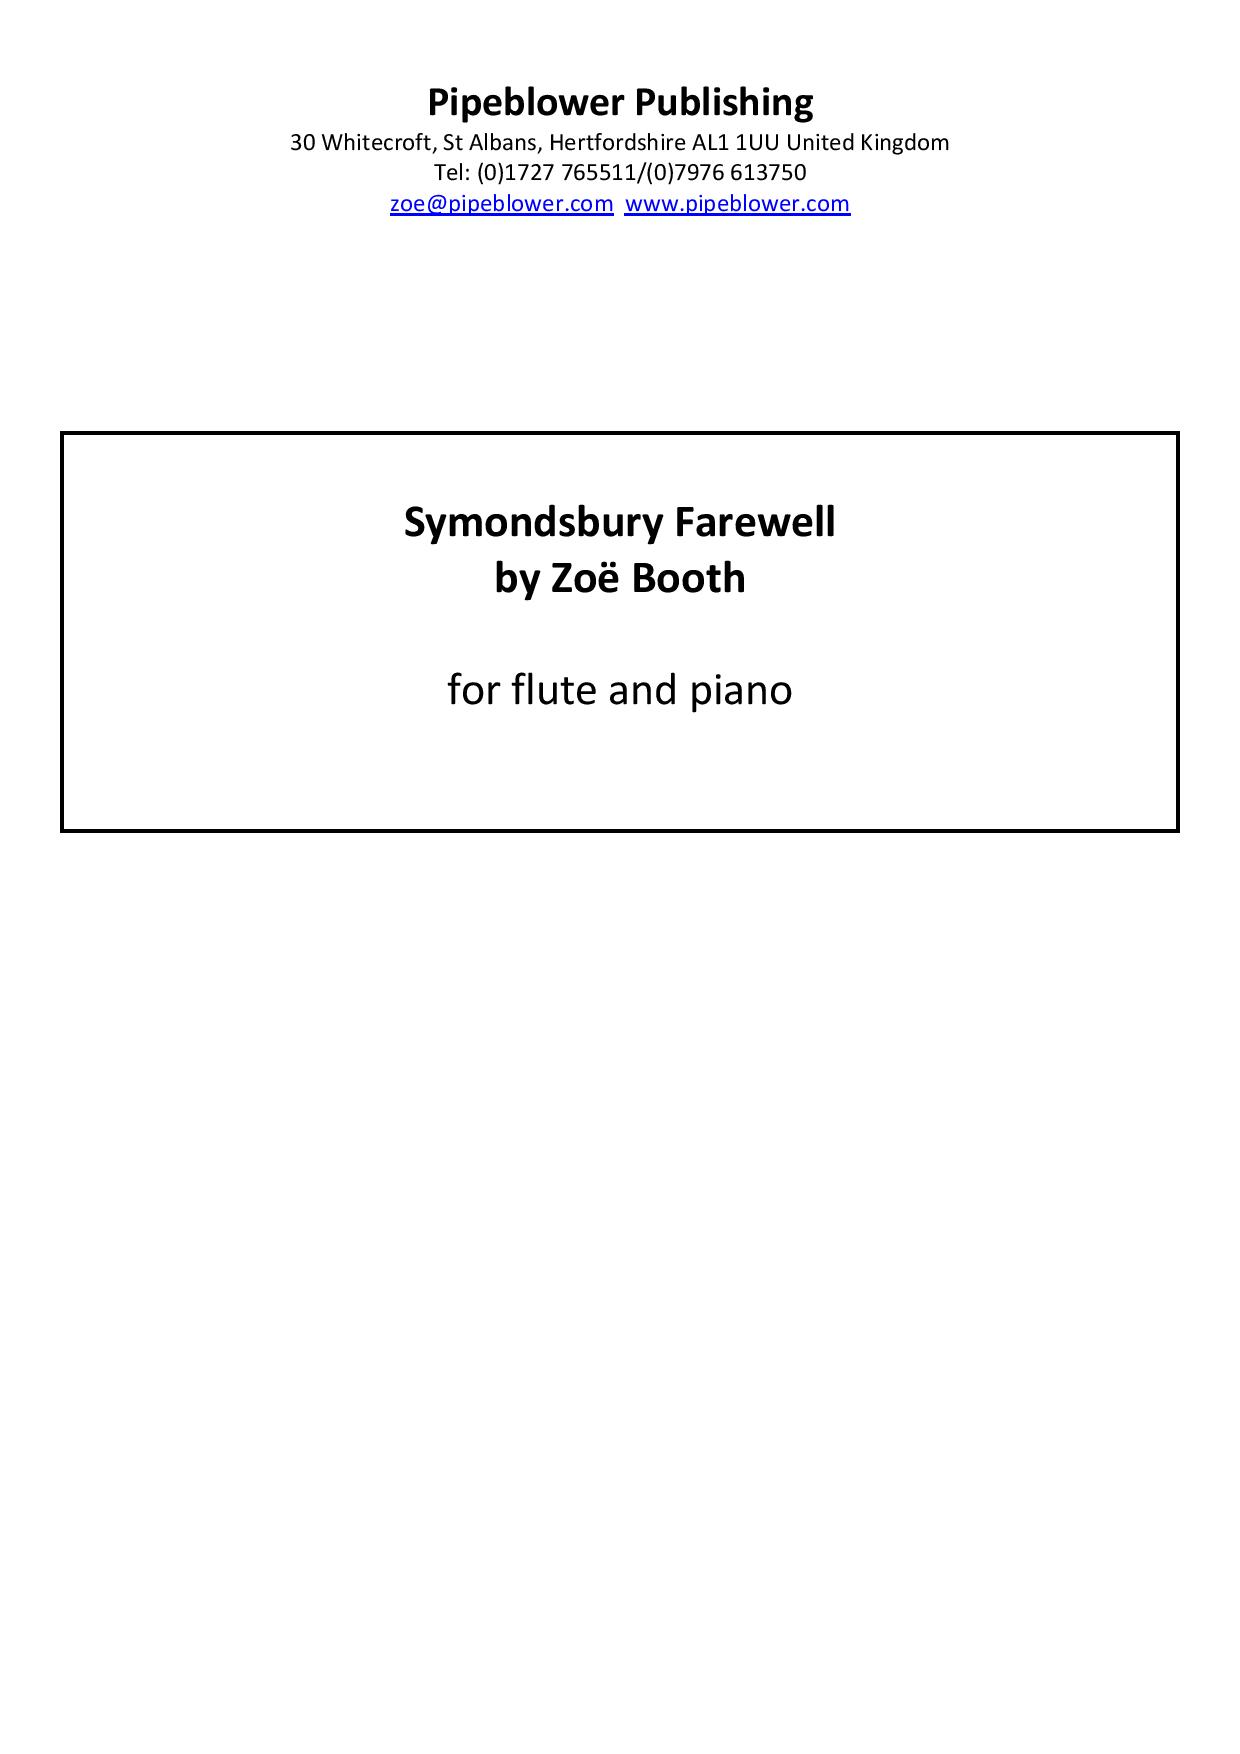 Symondsbury Farewell for Flute and Piano by Zoë Booth